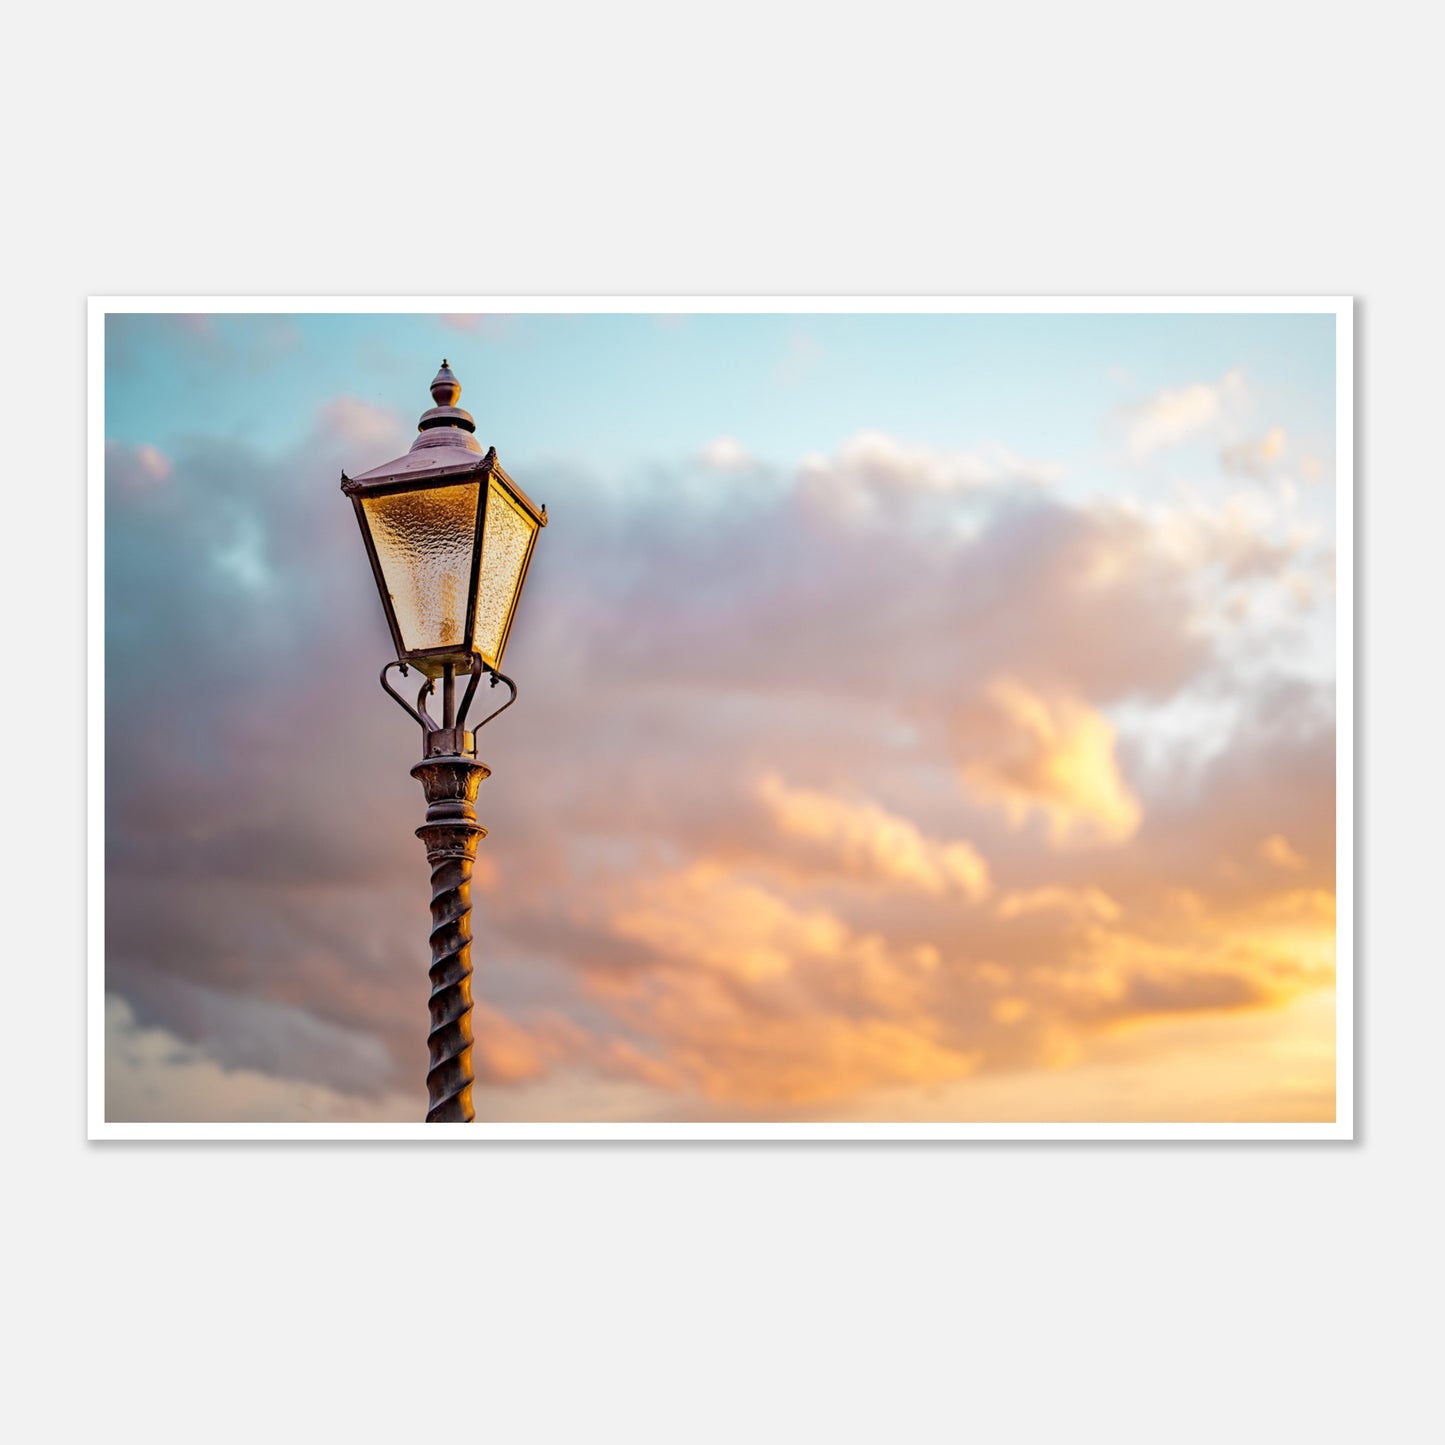 Lamppost at Sunset (Poster)